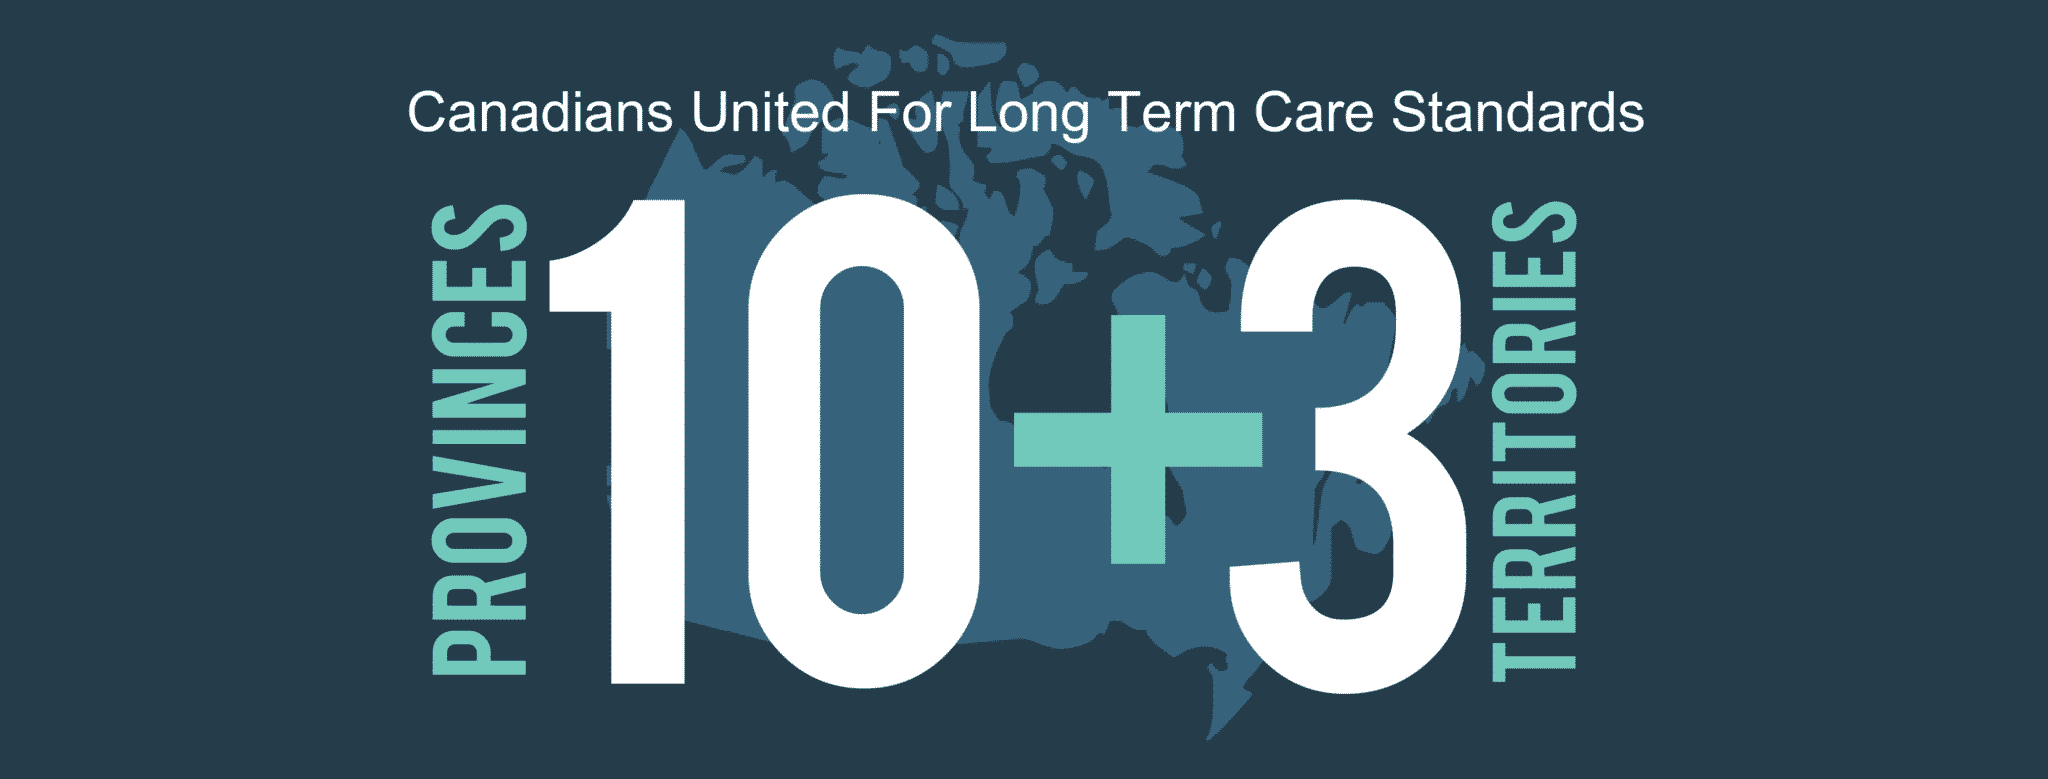 Canadians united for long term care standards banner